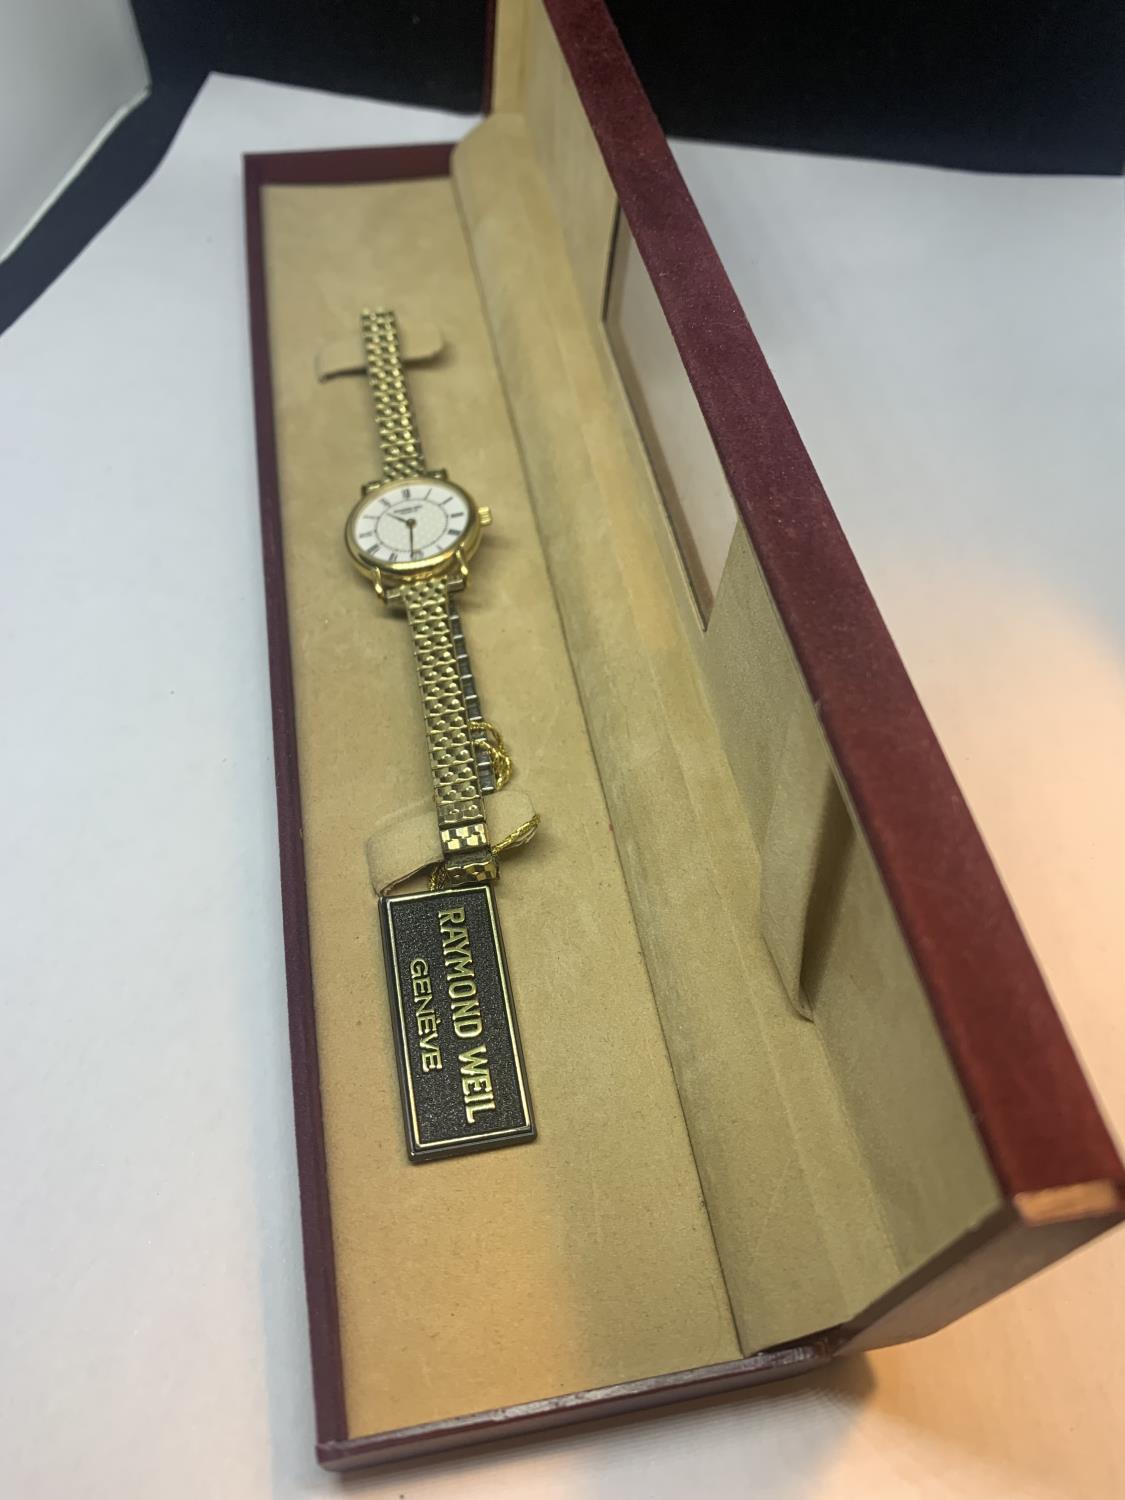 A RAYMOND WEIL GENEVE LADIES WRISTWATCH 18 CARAT GOLD PLATED WITH ORIGINAL BOX AND A SERVICE